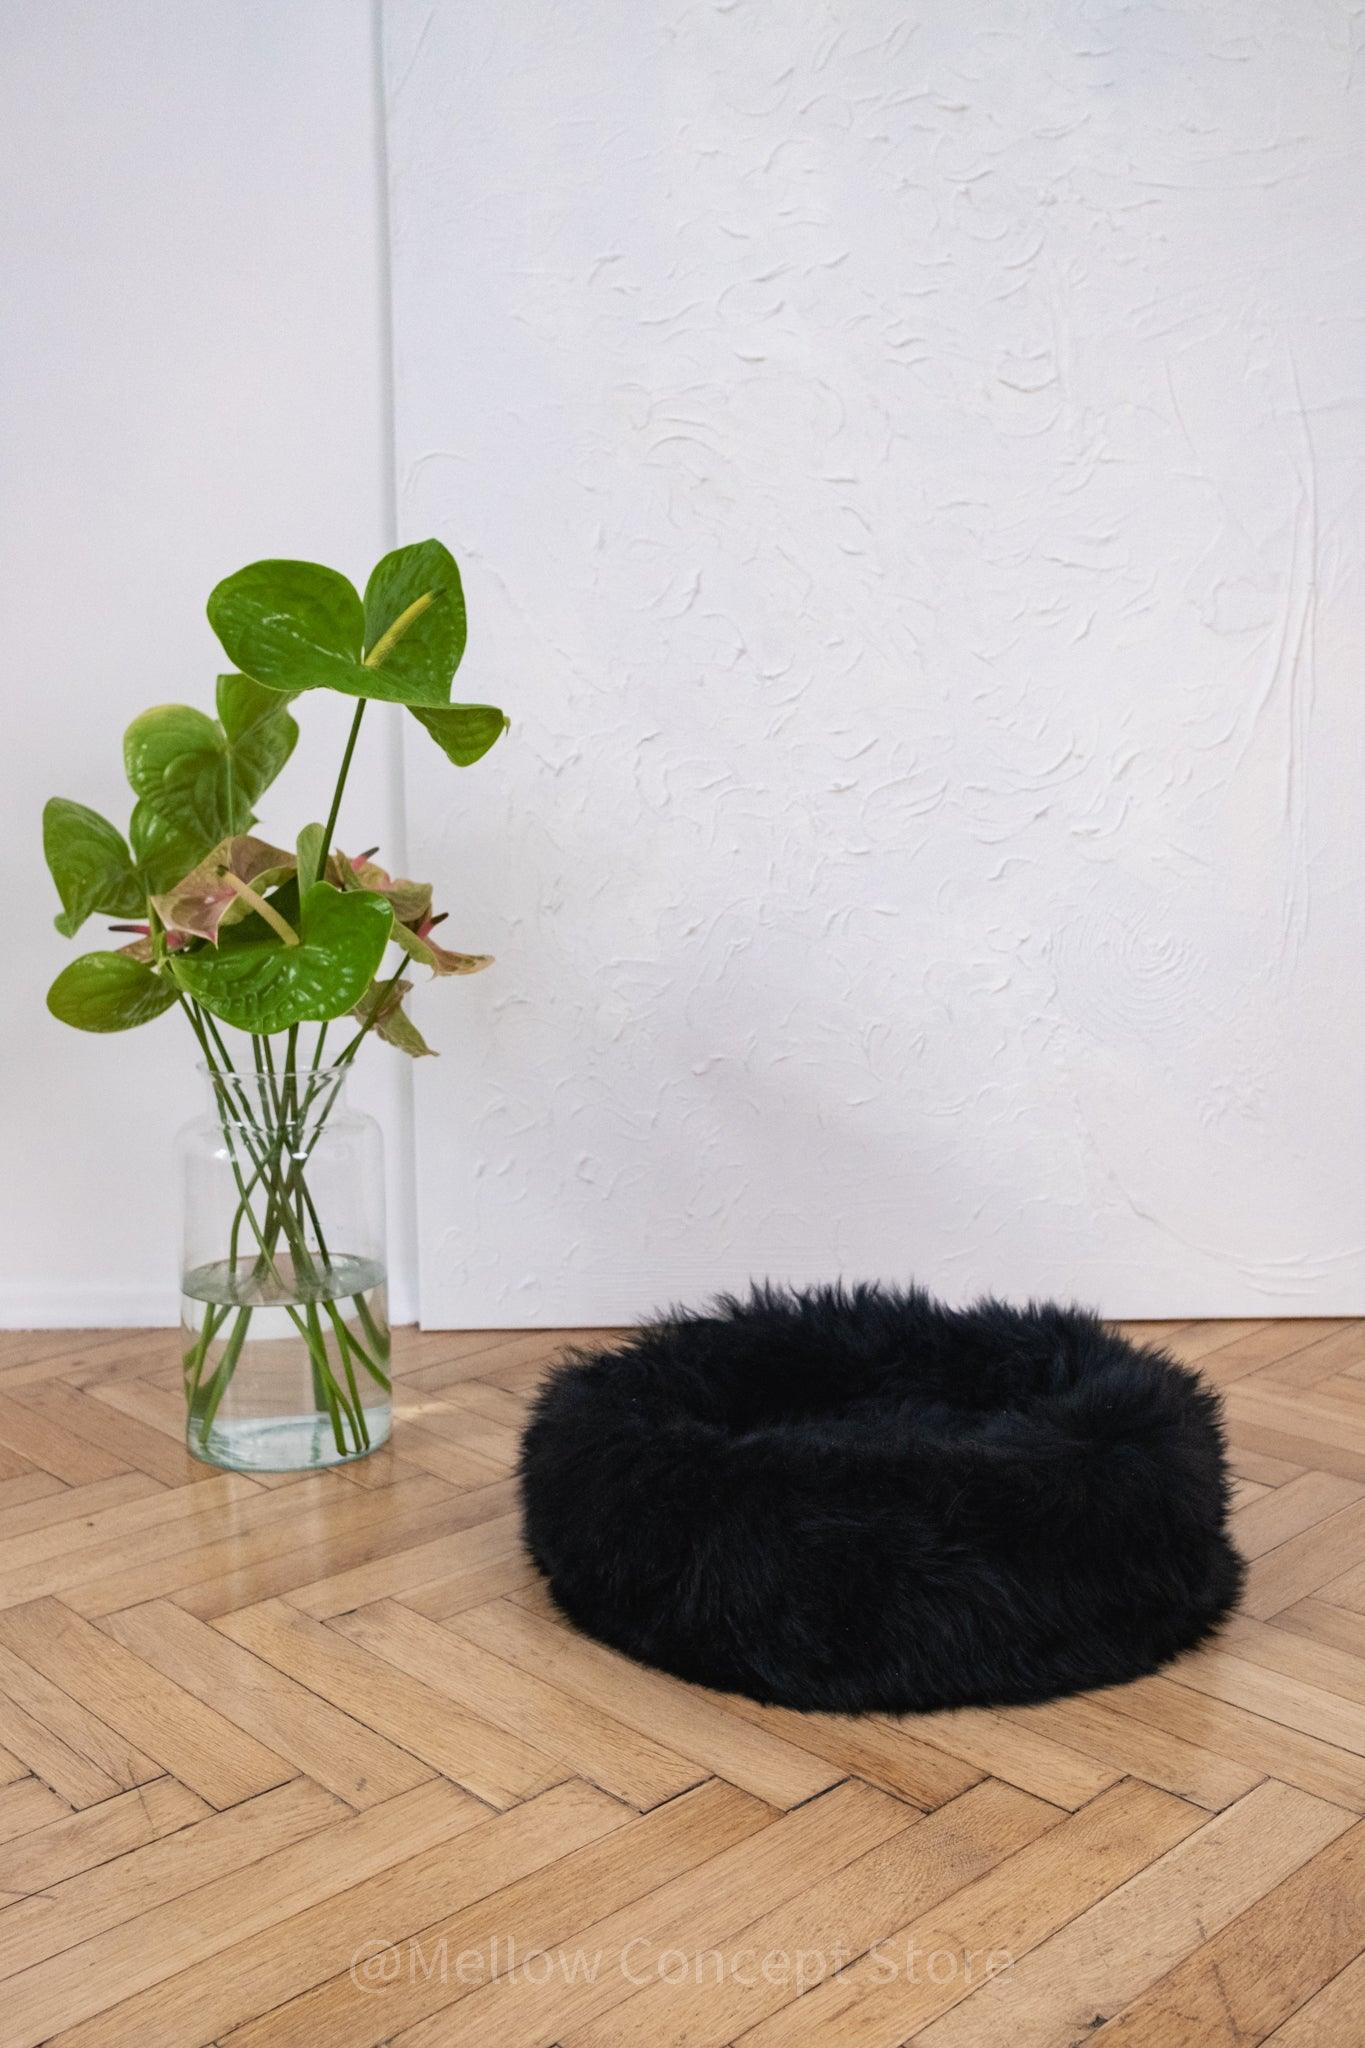 A black Round Natural Sheepskin Pet Bed made by Mellow Pet Store on a wooden floor.